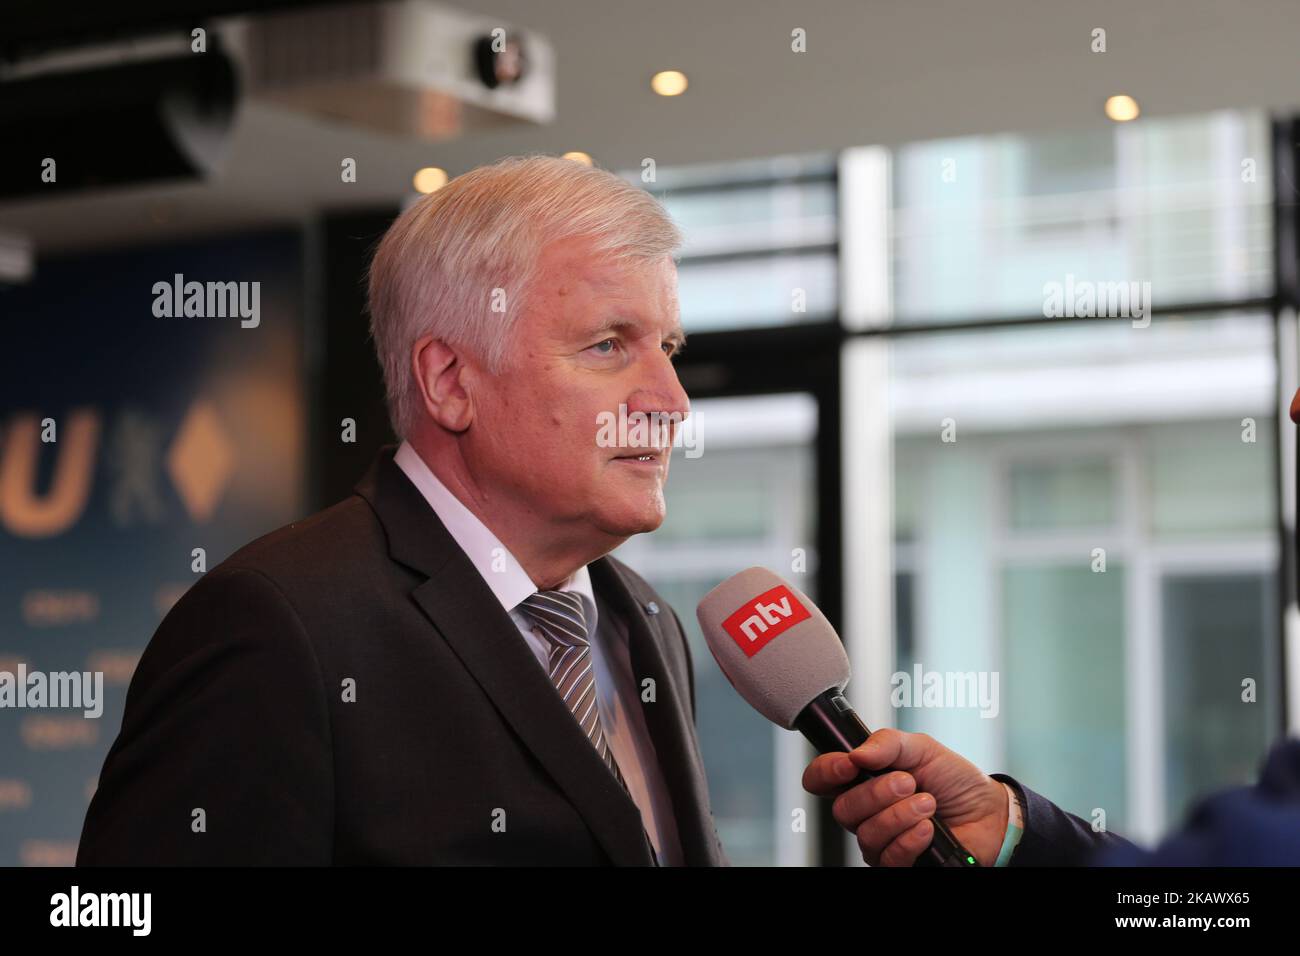 Horst Seehofer gives an interview to NTV in Munich, Germany, on 5 March 2018. The Christian Social Union anounced its new federal ministers, the deputy state secretaries and the new secretary general. Yesterday the Social Democratic Party of Germany (SPD) anounced, that the members voted for a new Grand Coalition (GroKo) with the CDU and CSU. (Photo by Alexander Pohl/NurPhoto) Stock Photo